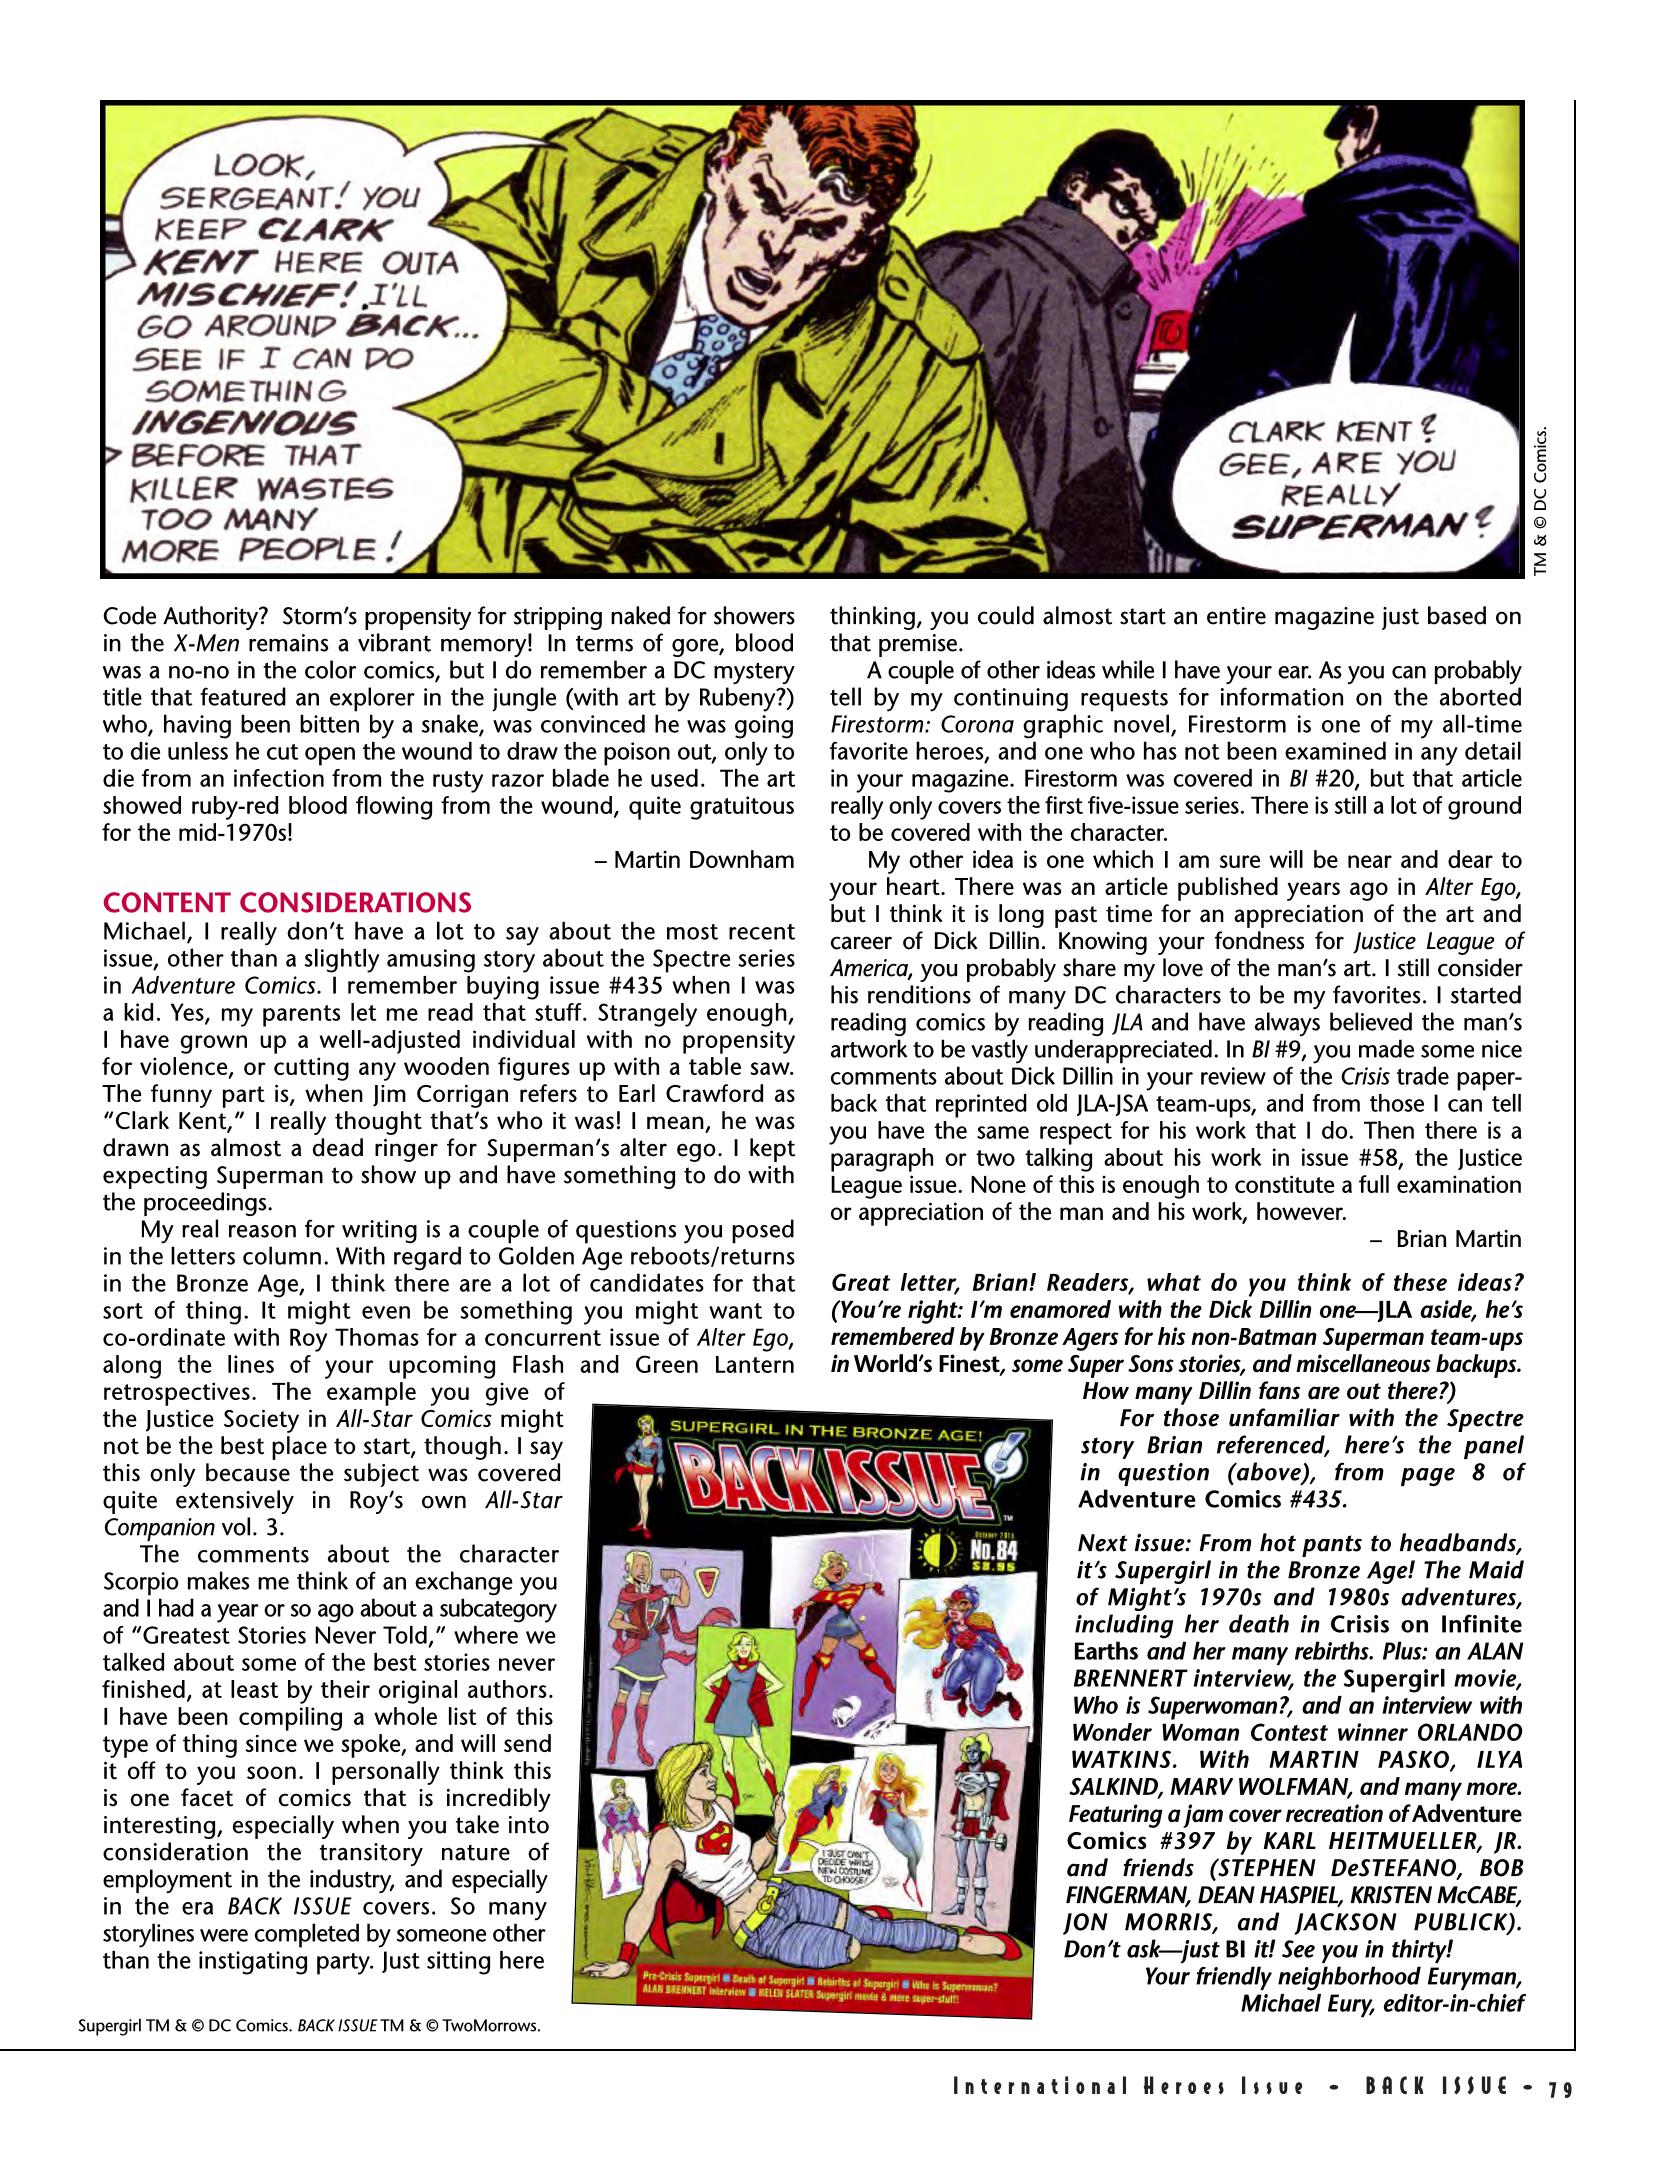 Read online Back Issue comic -  Issue #83 - 81